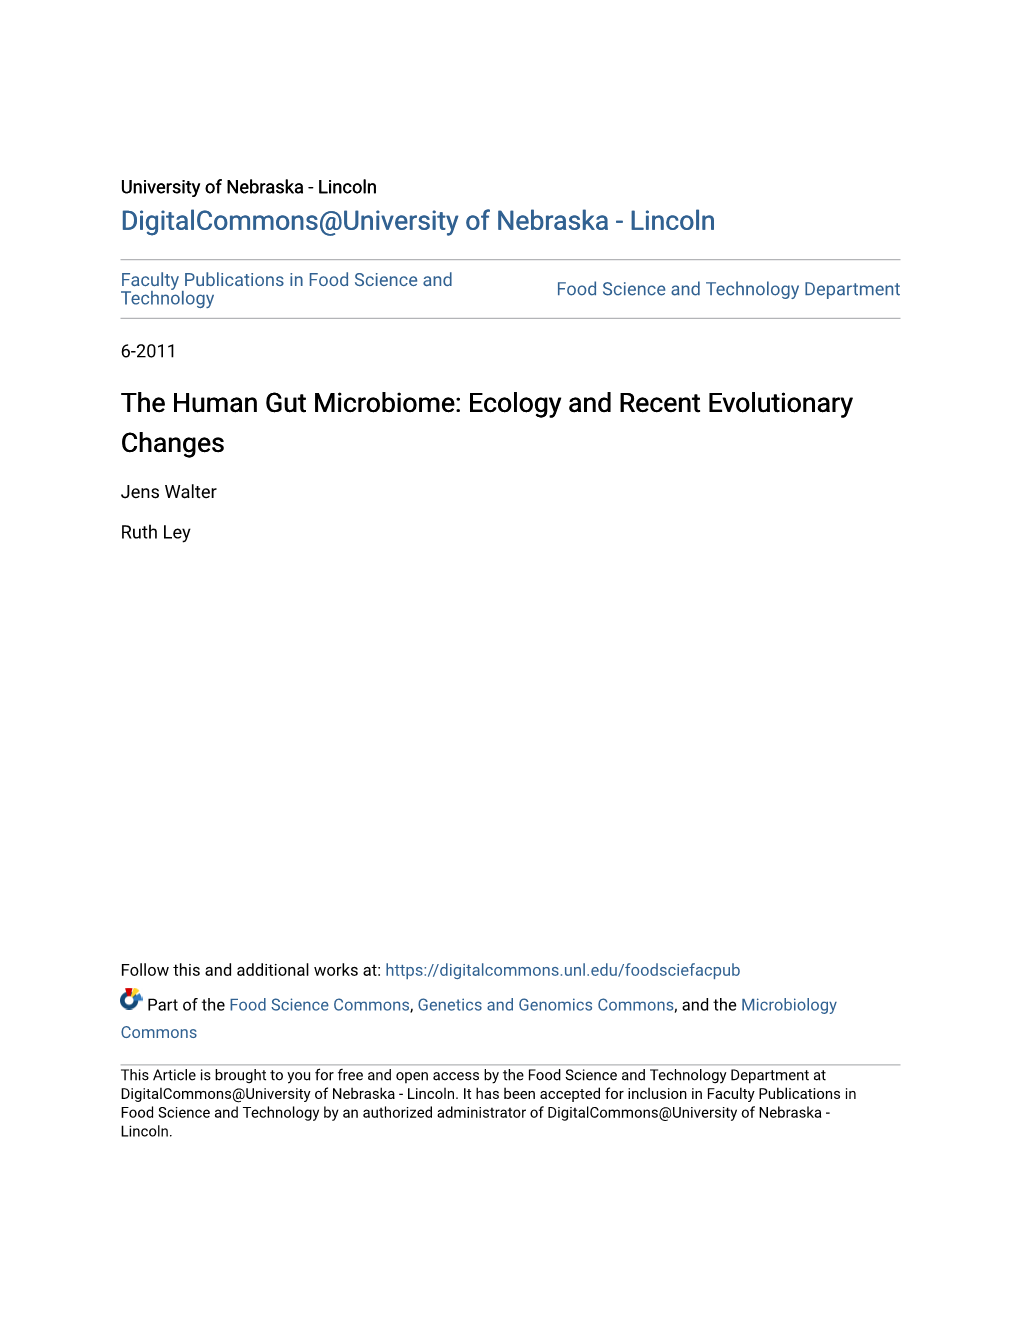 The Human Gut Microbiome: Ecology and Recent Evolutionary Changes